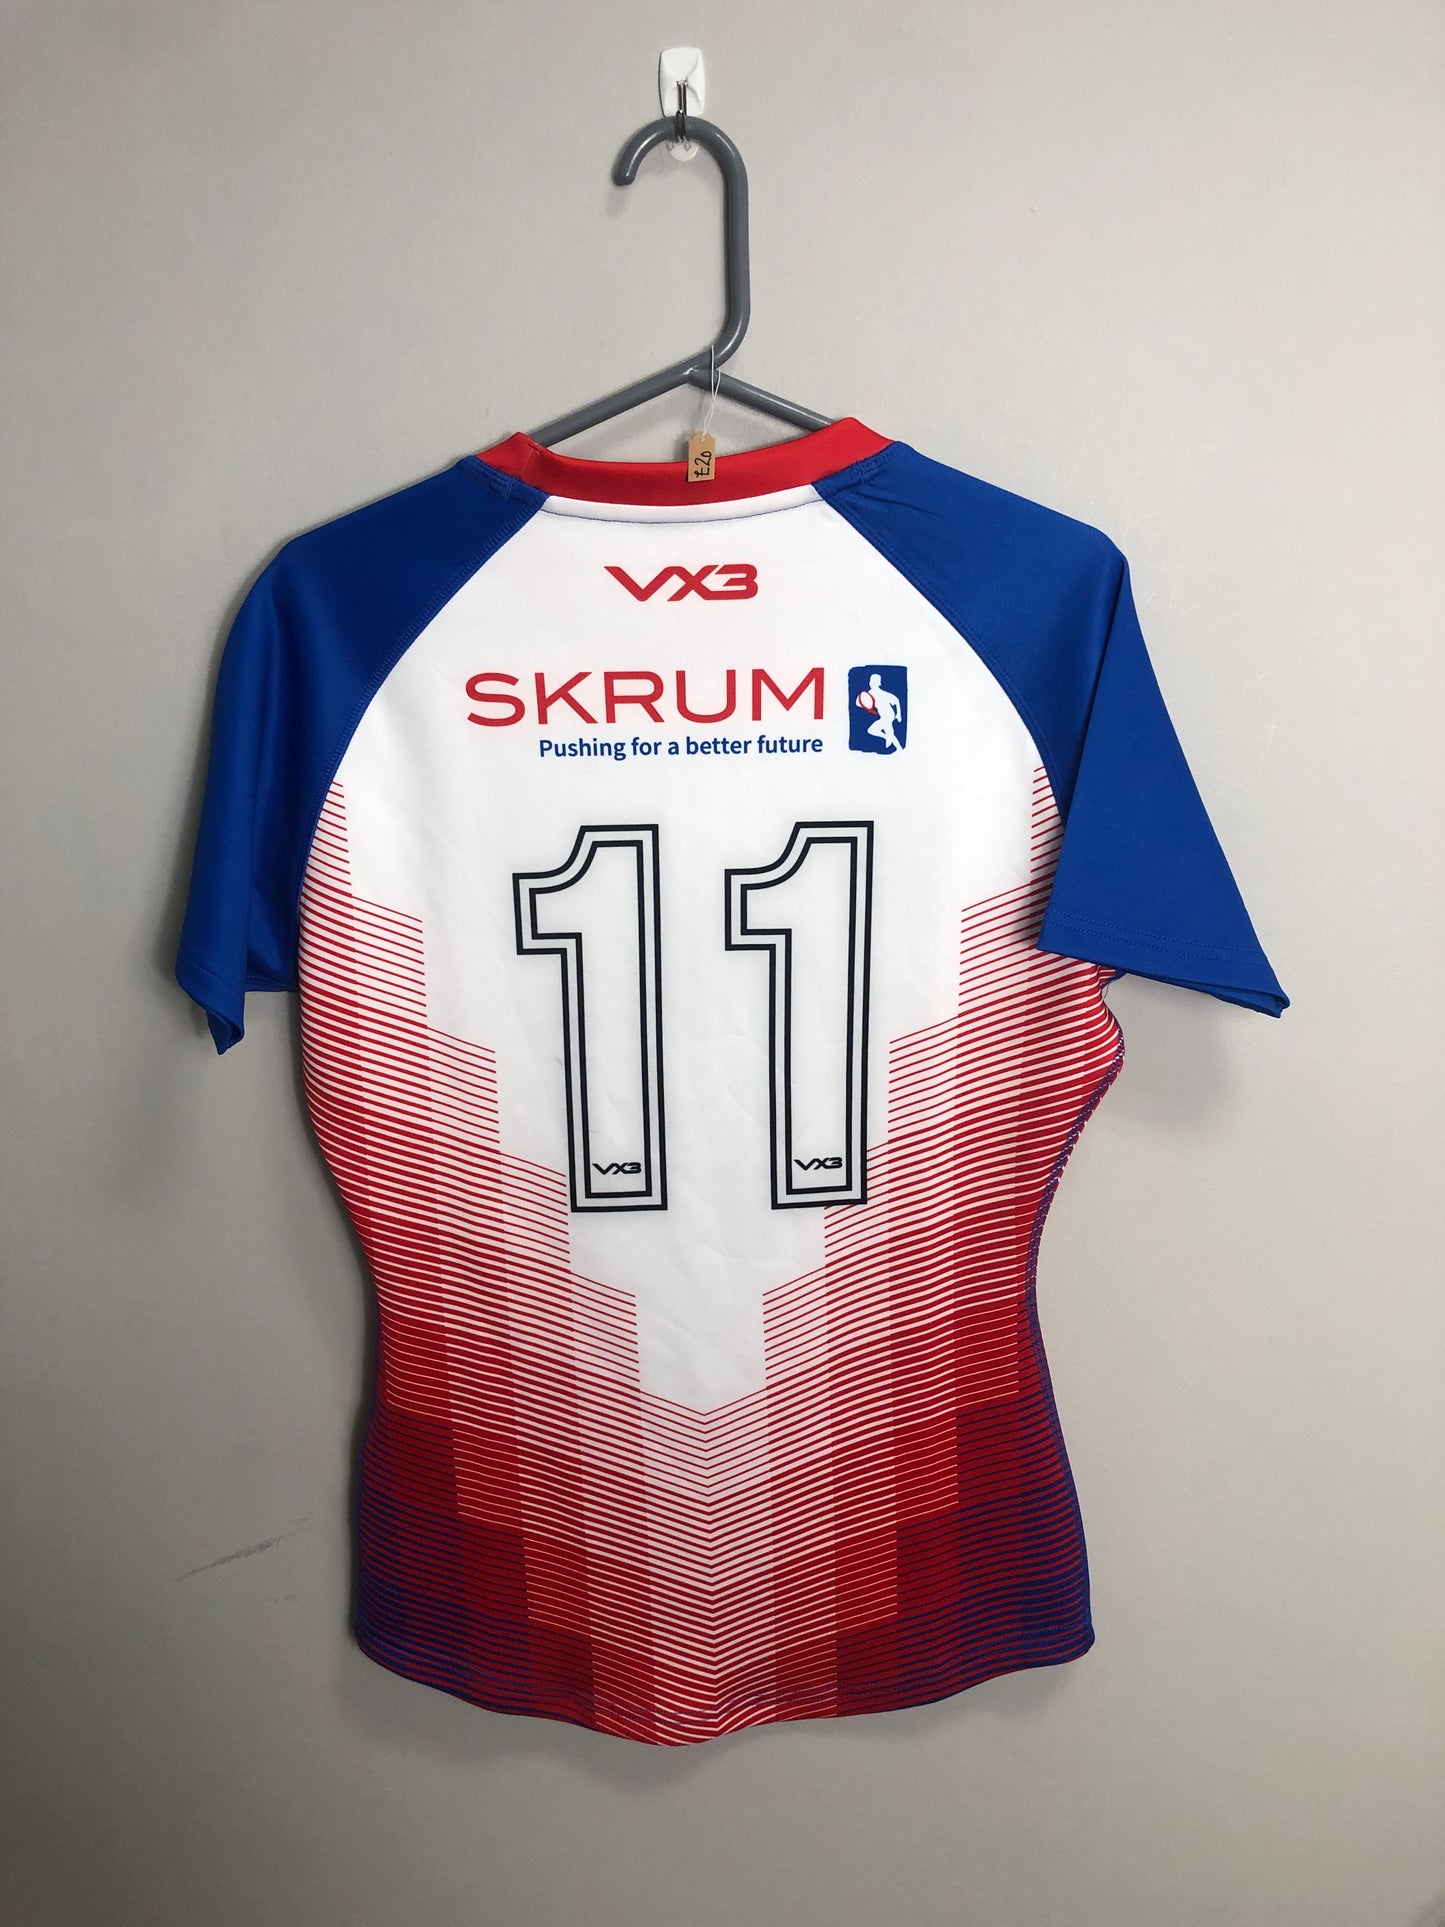 Skrum Rugby Shirt - 38” Chest - #11 - Small